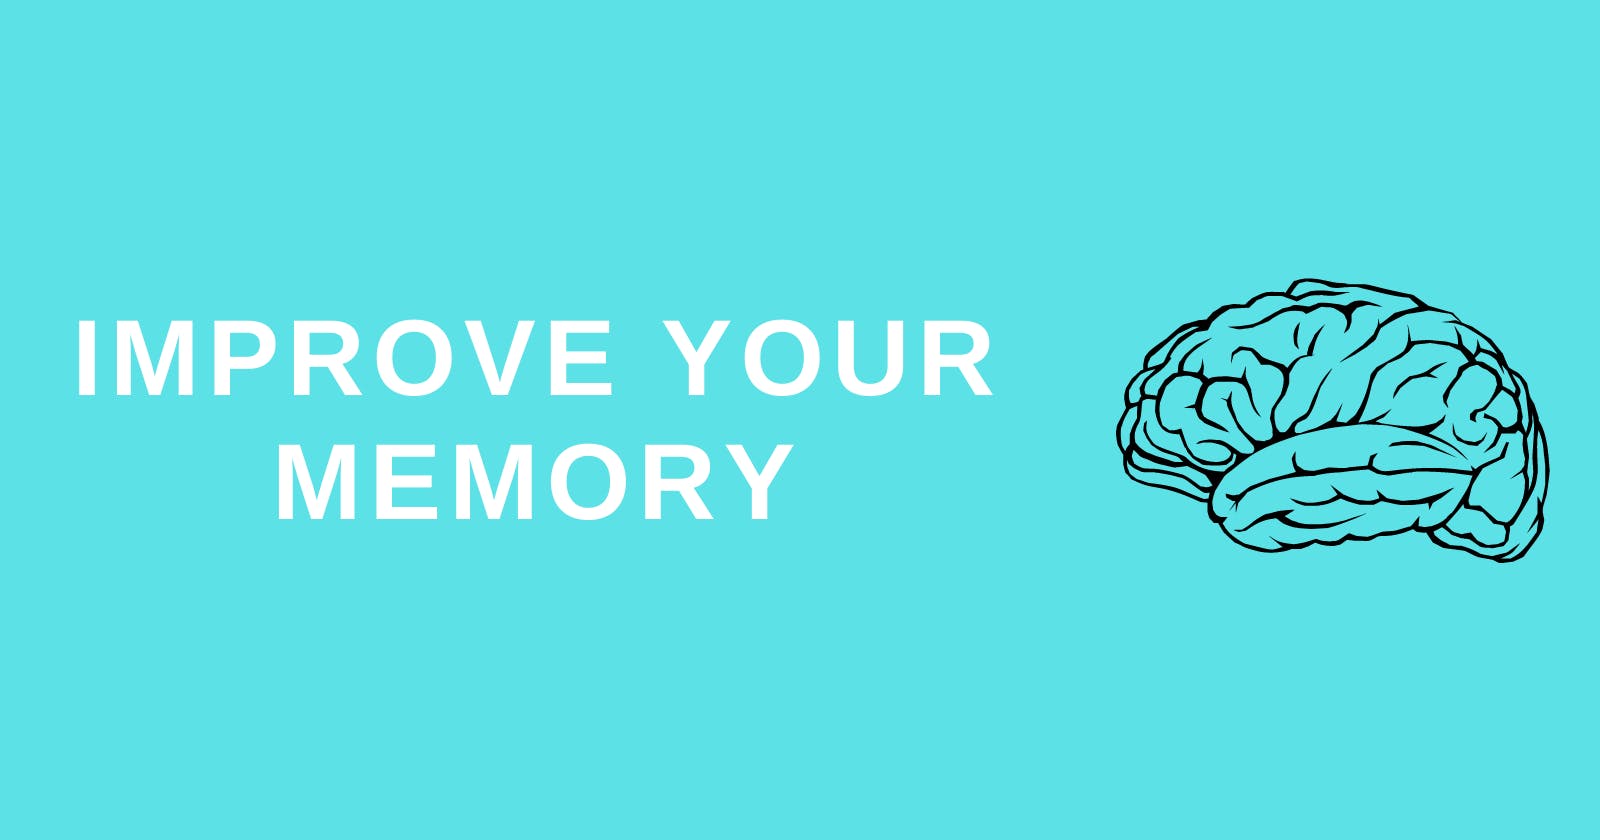 How to improve your memory